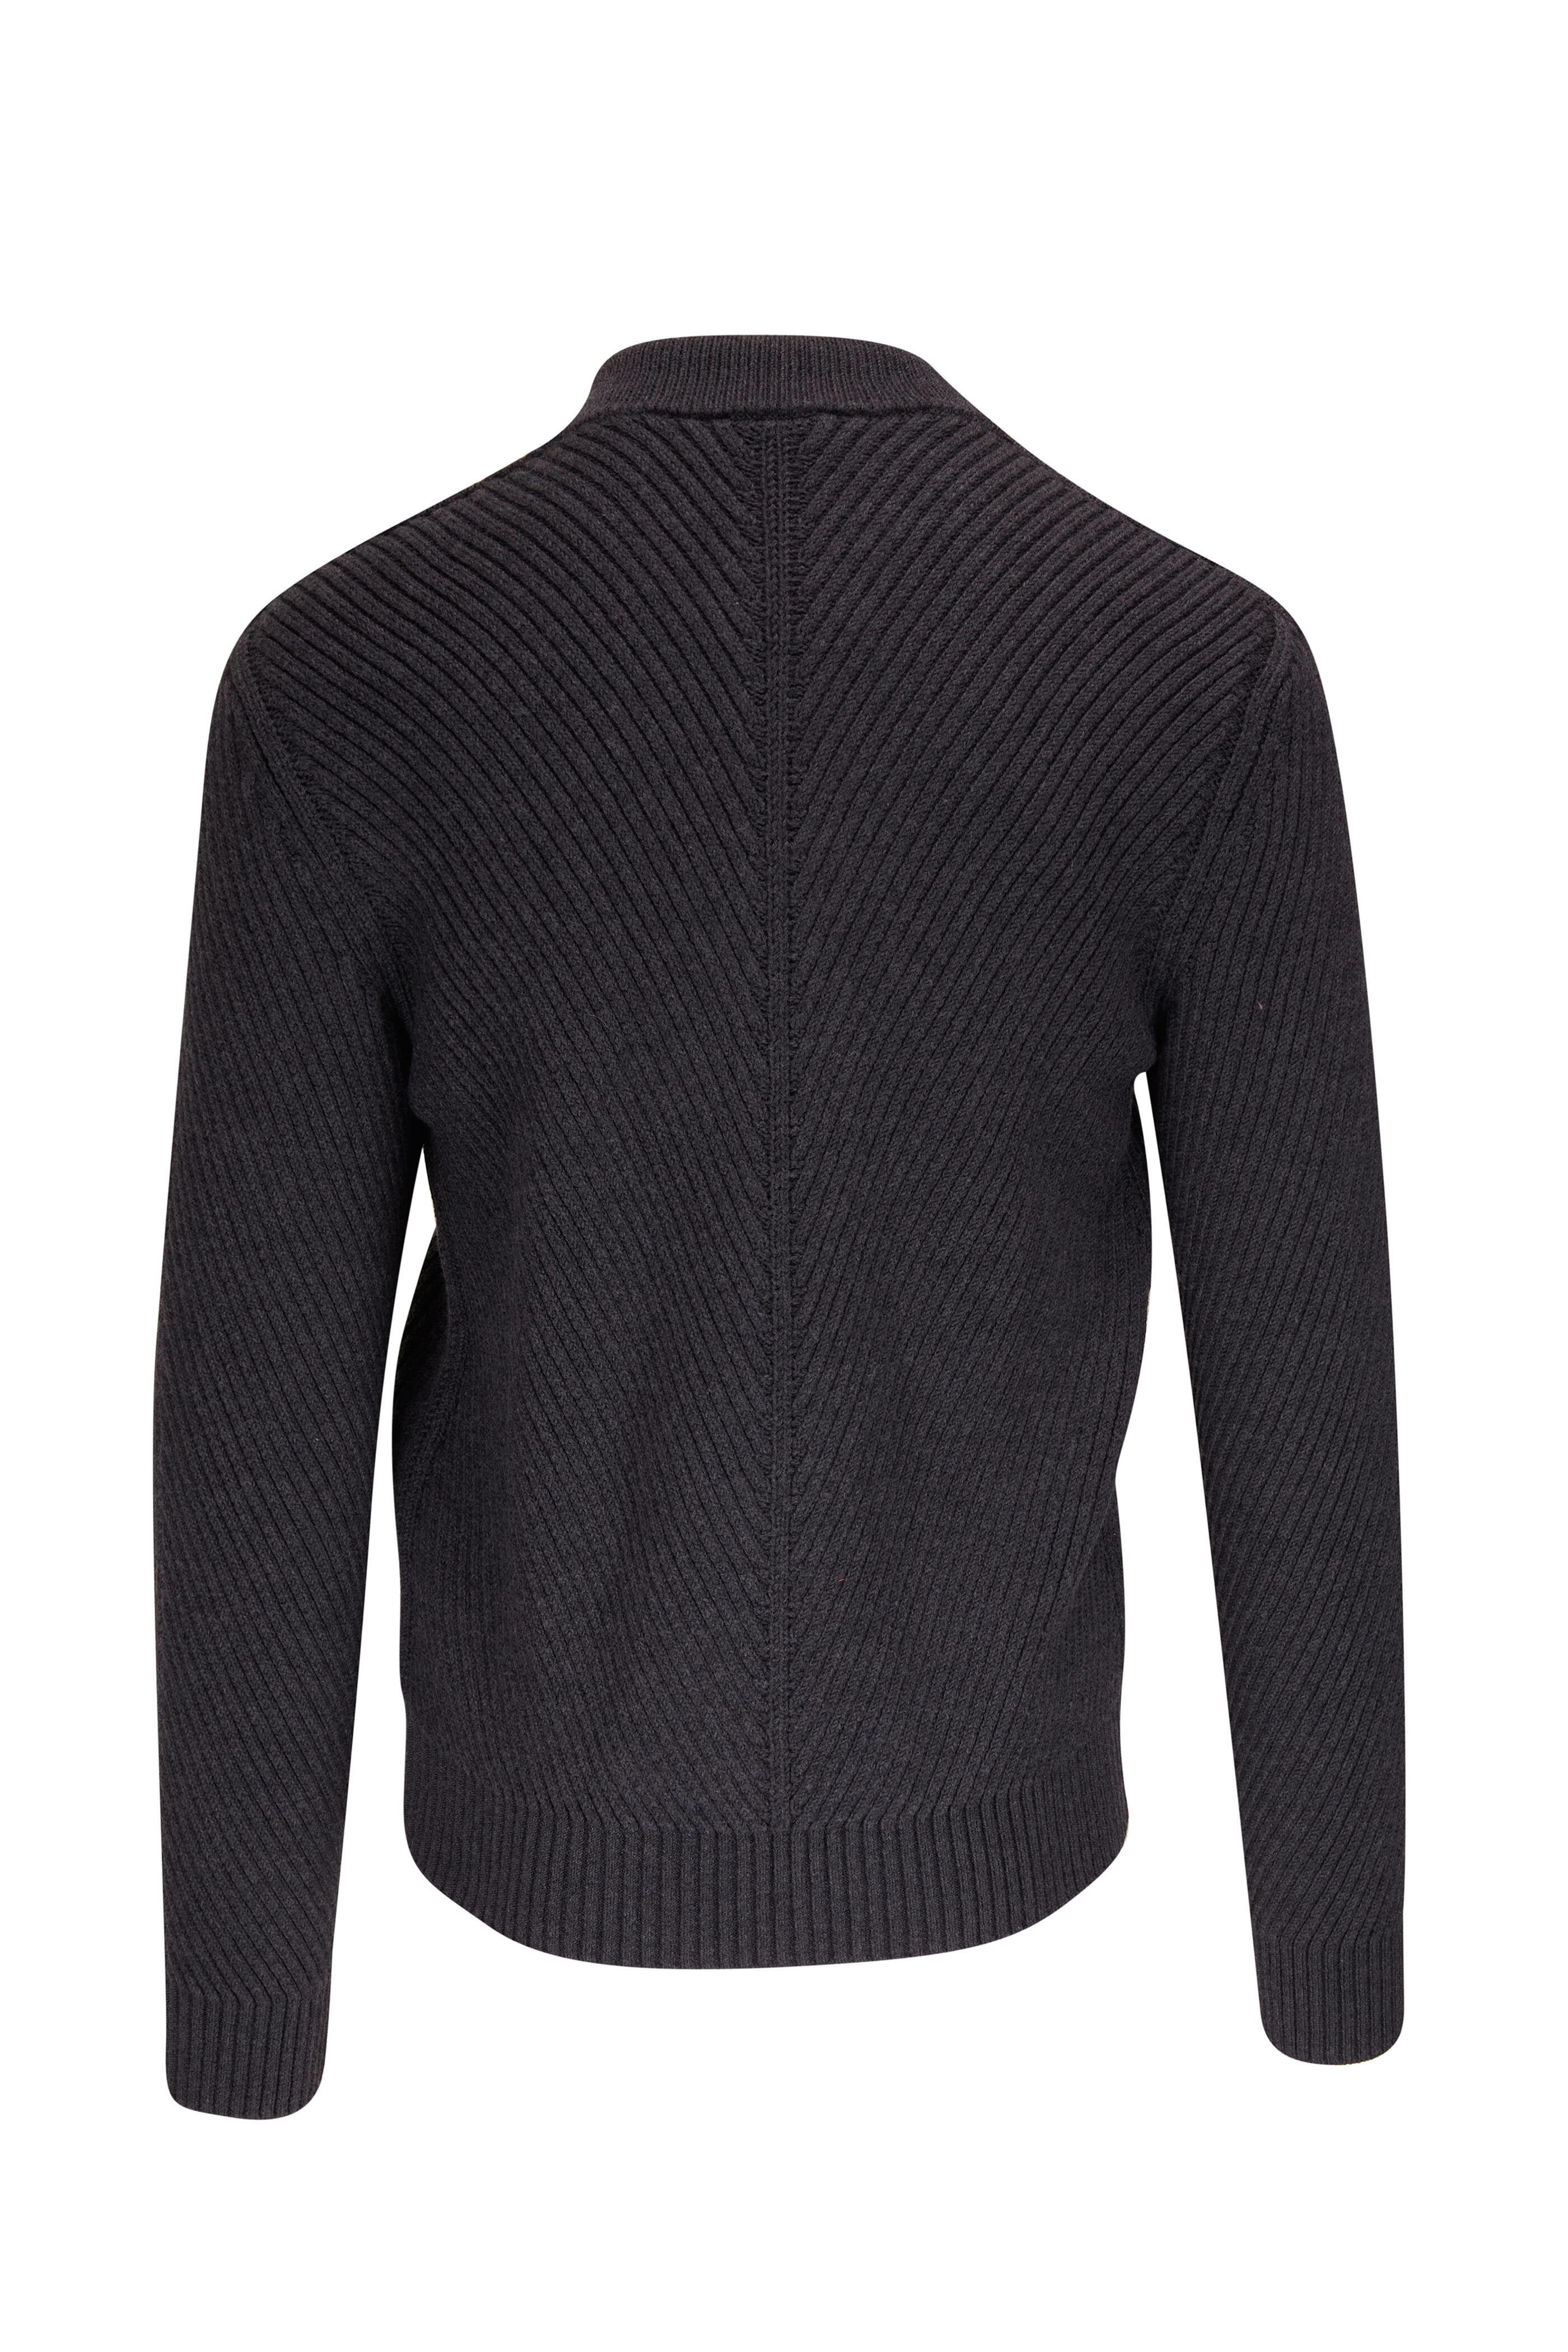 Brioni - Charcoal Ribbed Wool Front Zip Sweater | Mitchell Stores